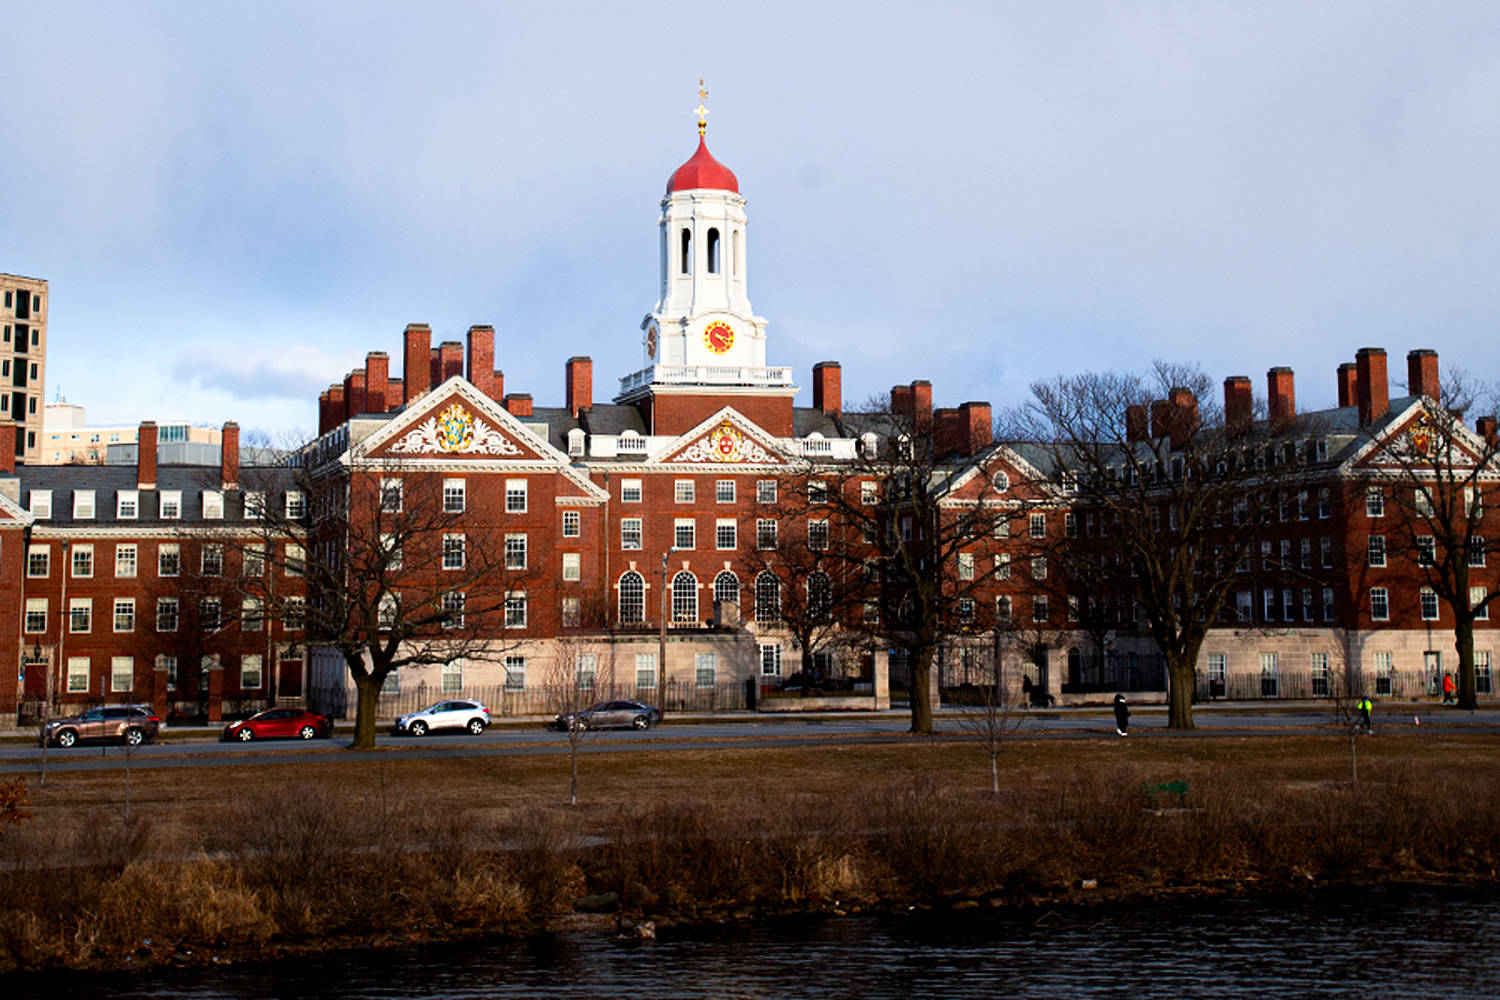 Harvard again requiring standardized test scores for those seeking admission